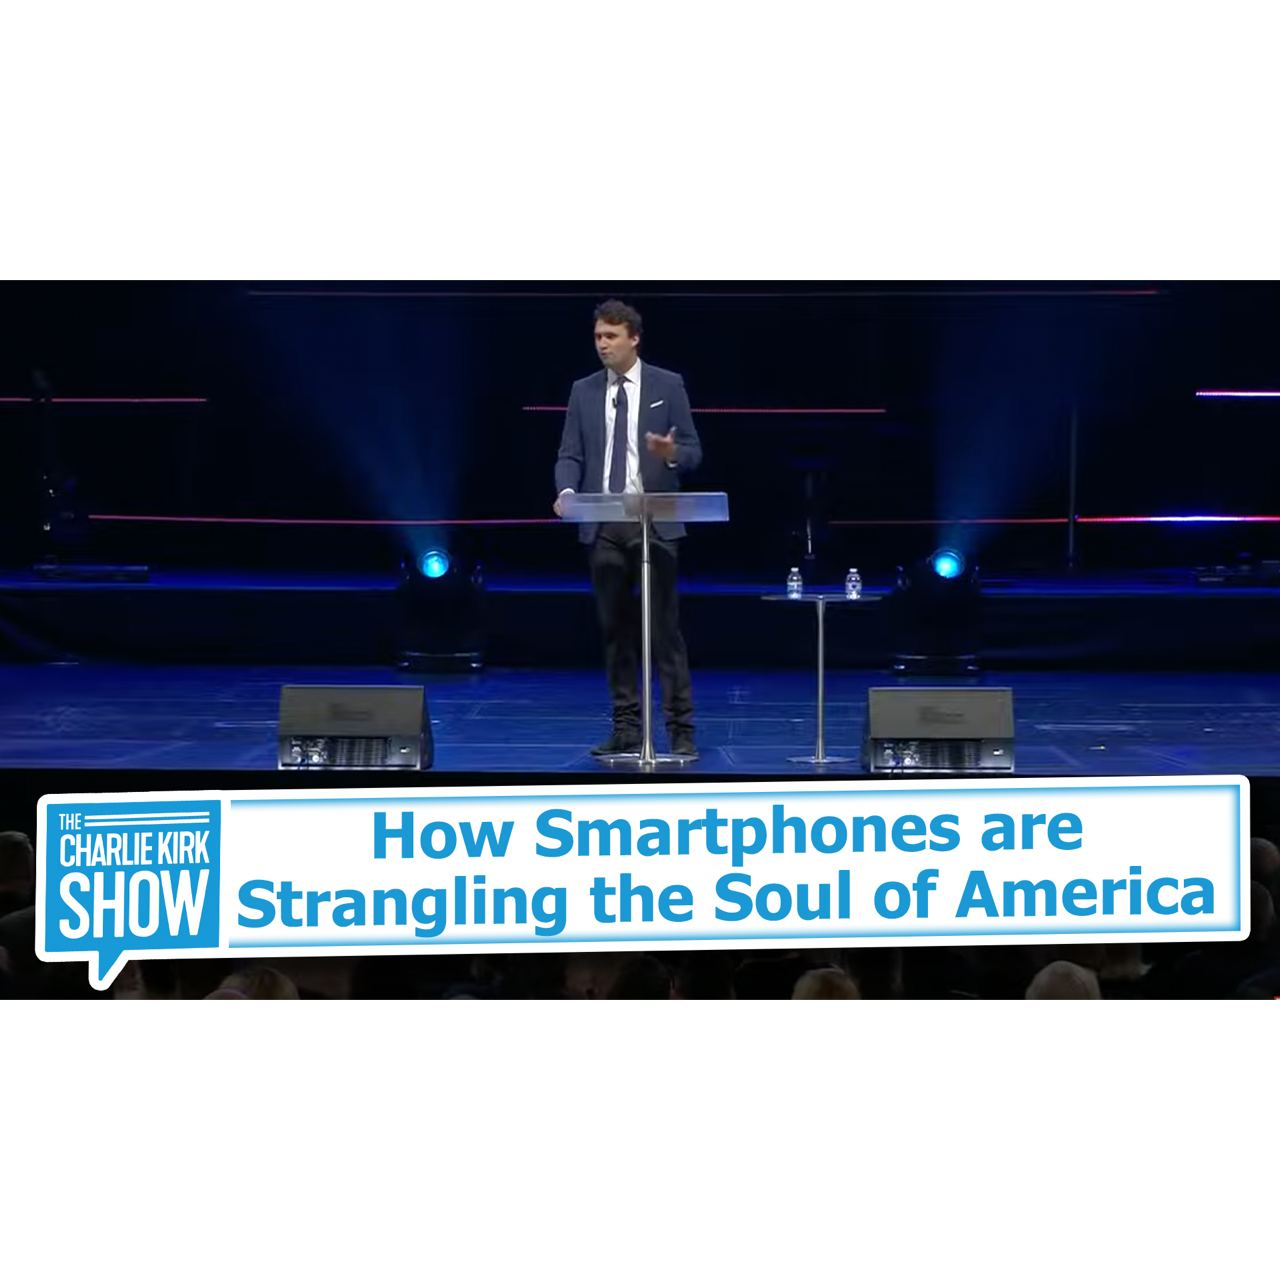 How Smartphones are Strangling the Soul of America